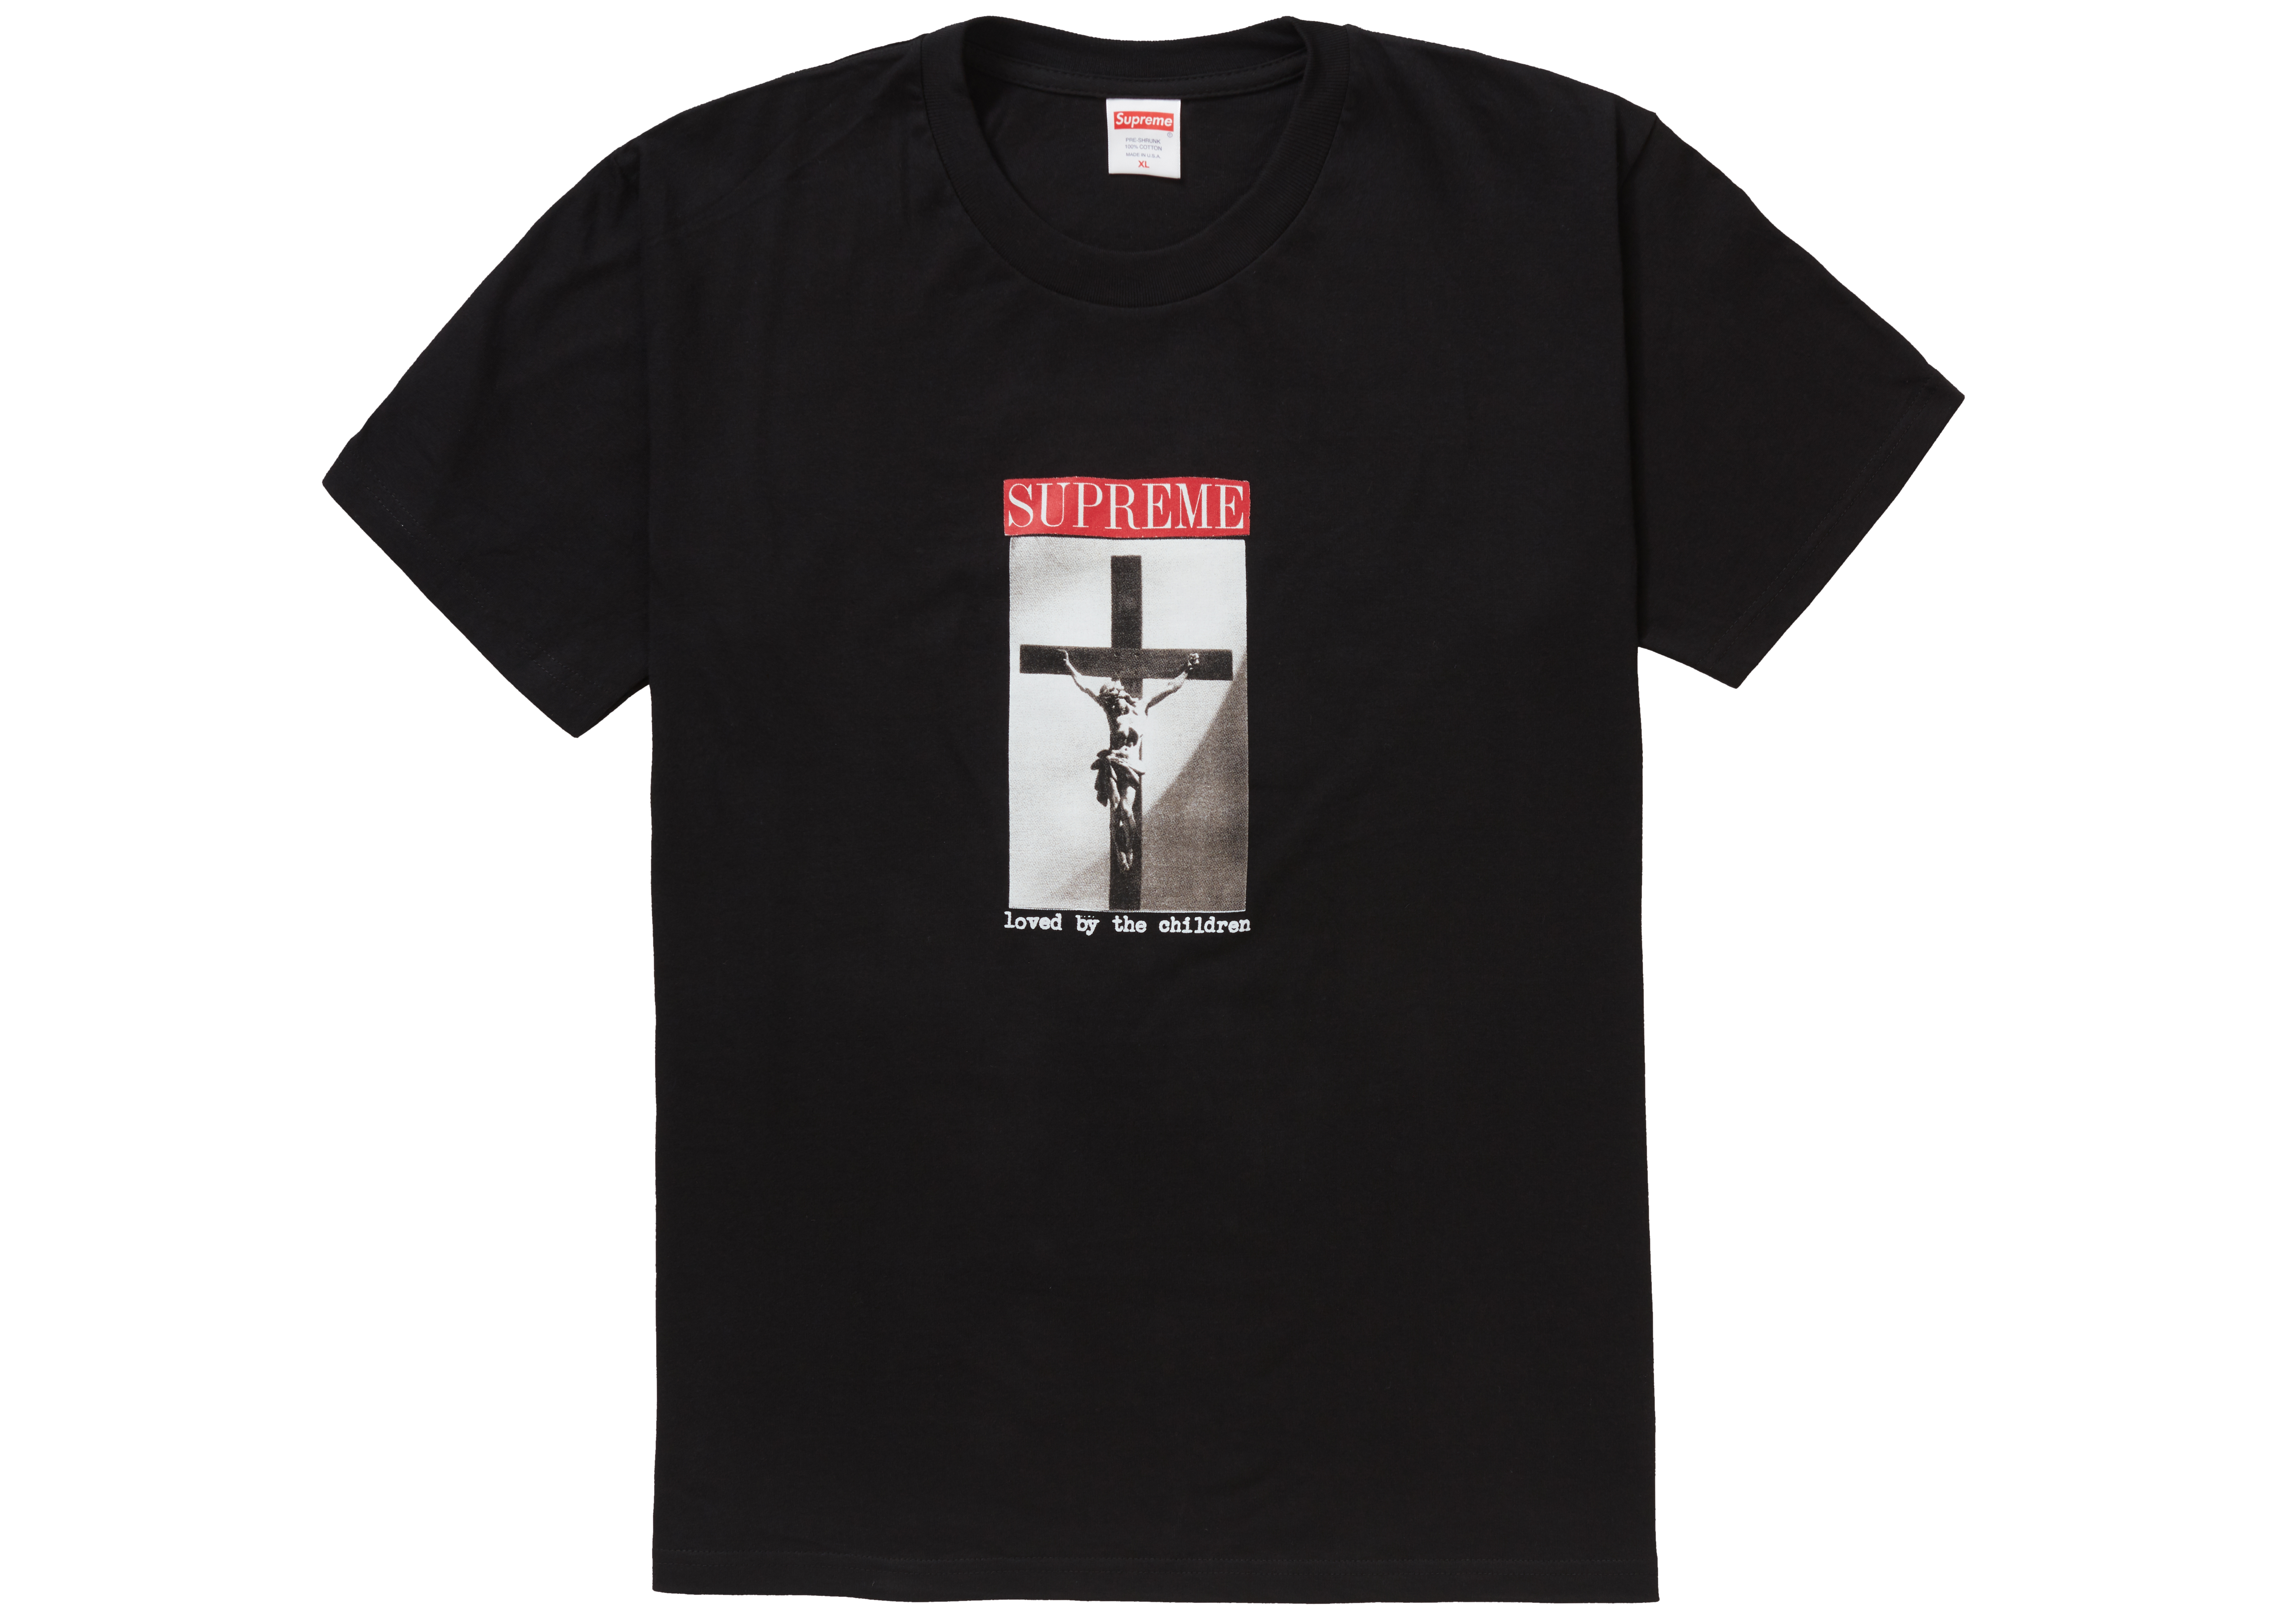 Supreme Loved By The Children Tee Black メンズ - SS20 - JP